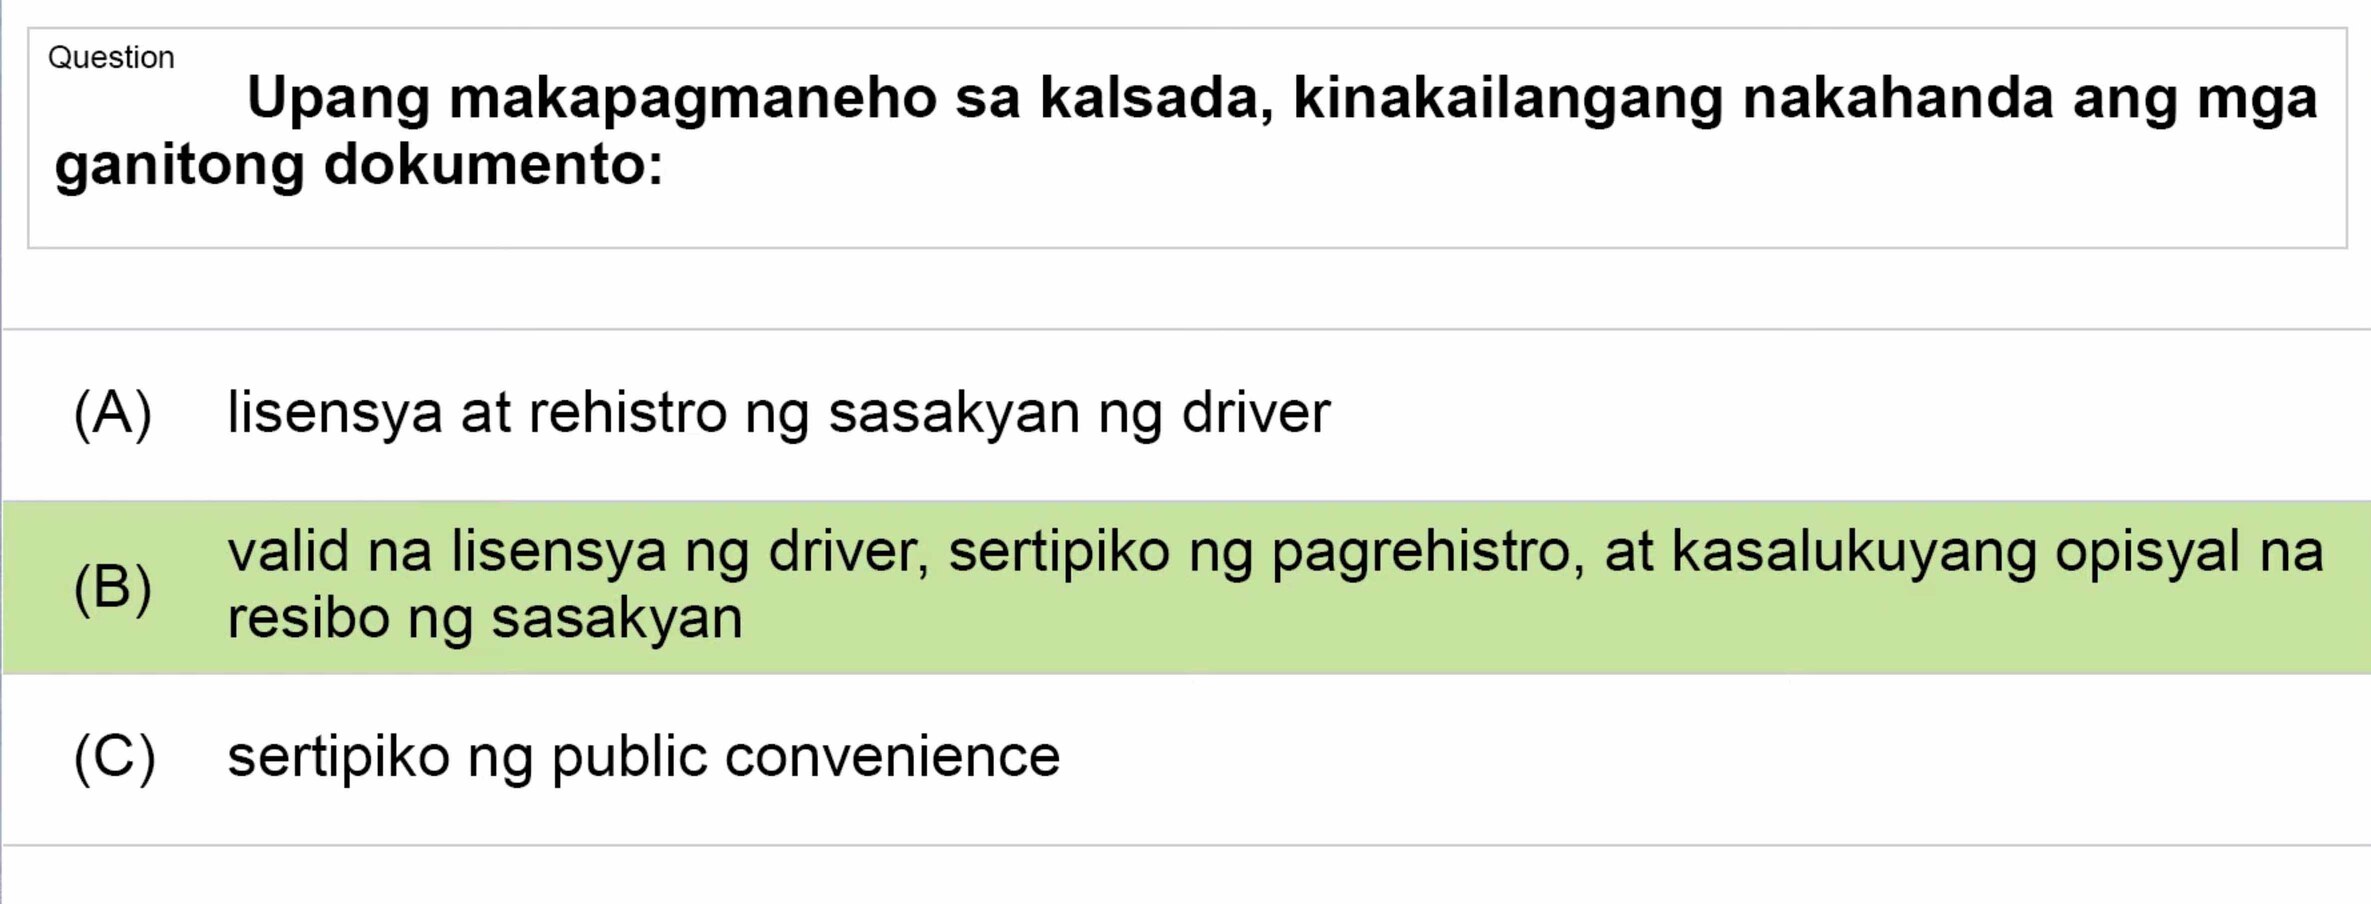 LTO Tagalog non professional exam reviewer motorcycle 1 (8)